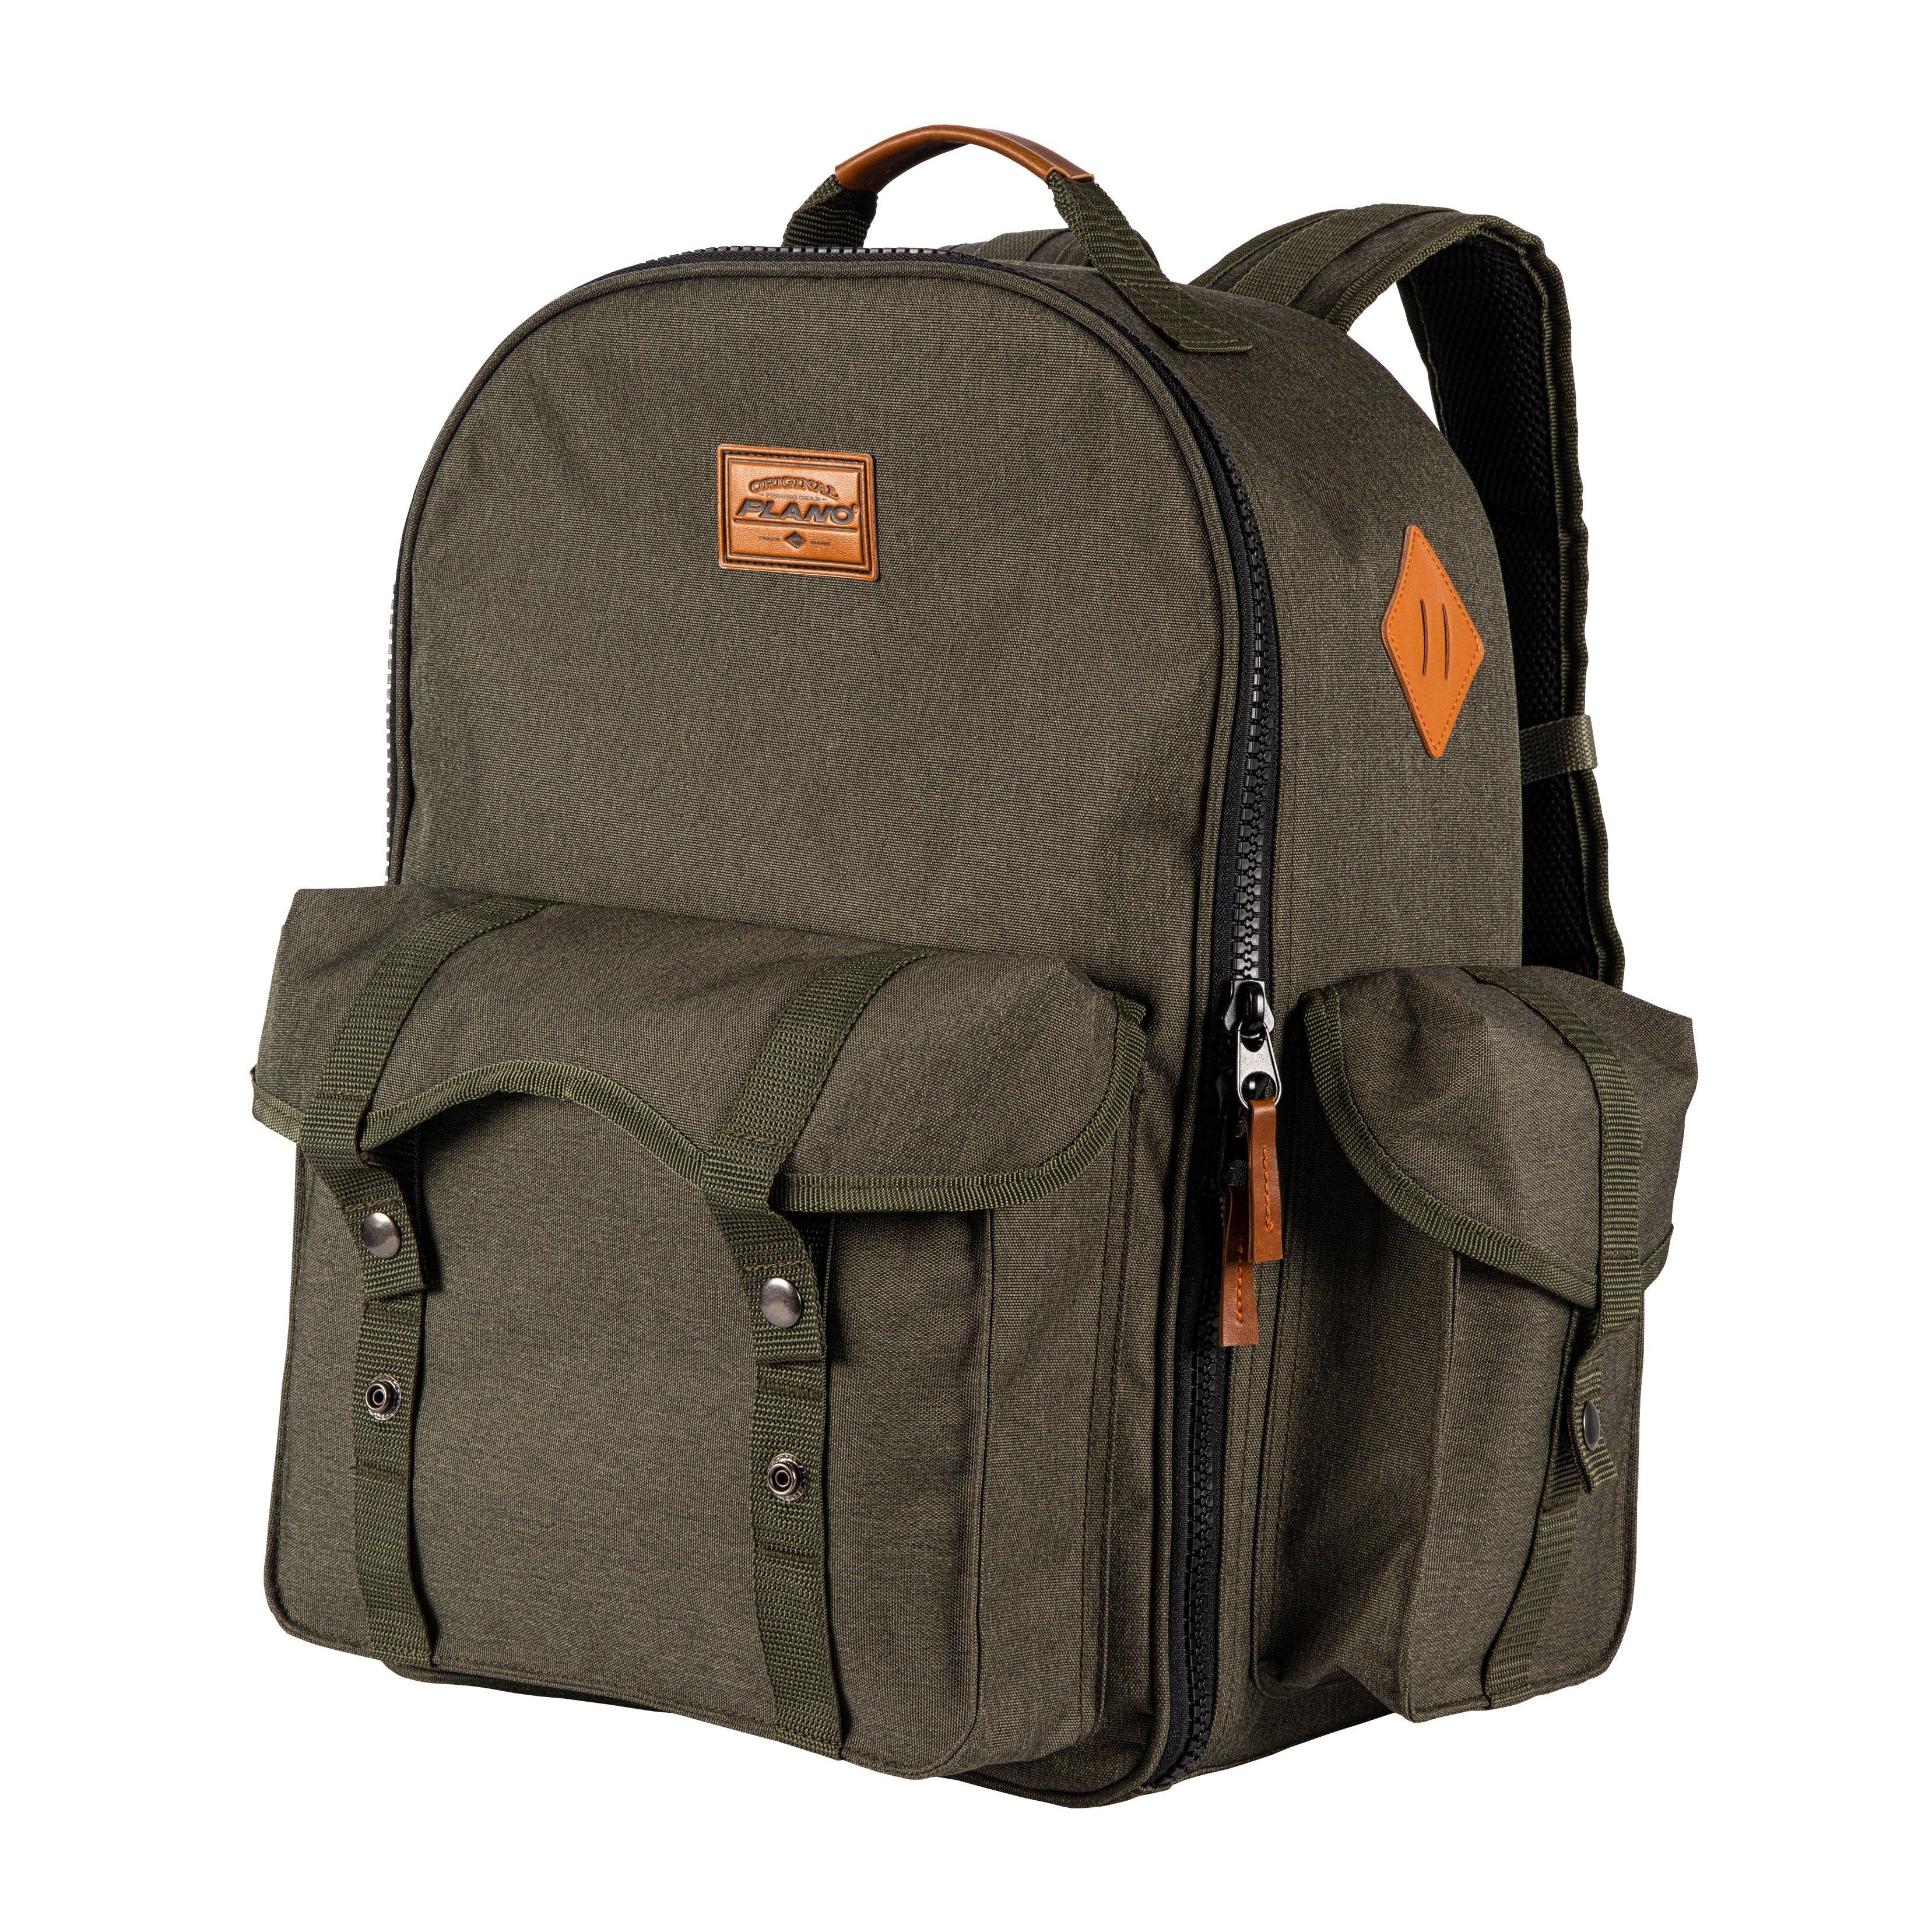 Plano A-Series™ 2.0 Tackle Backpack